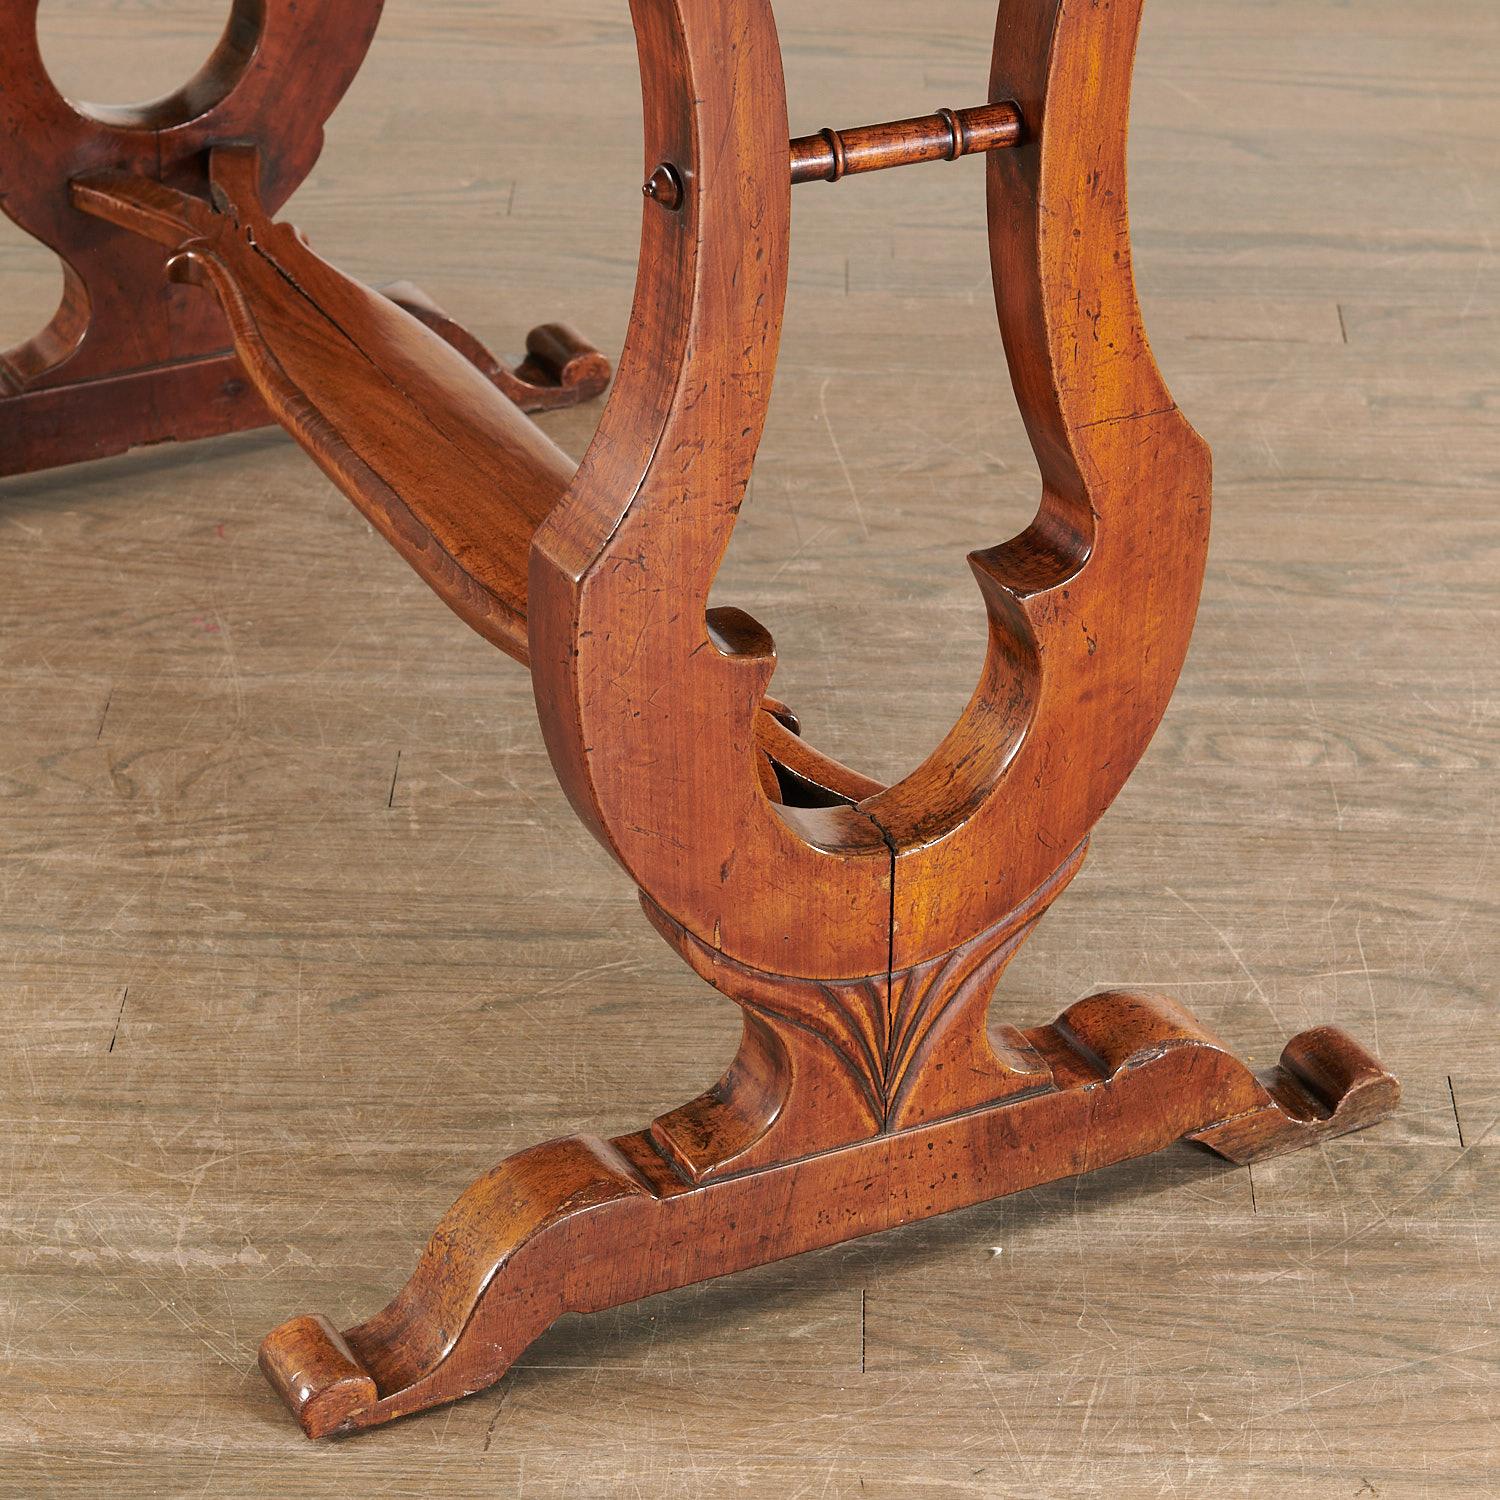 Turned Early 19th C. Biedermeier Sofa Table/Desk With Lyre-Form Trestle Base For Sale